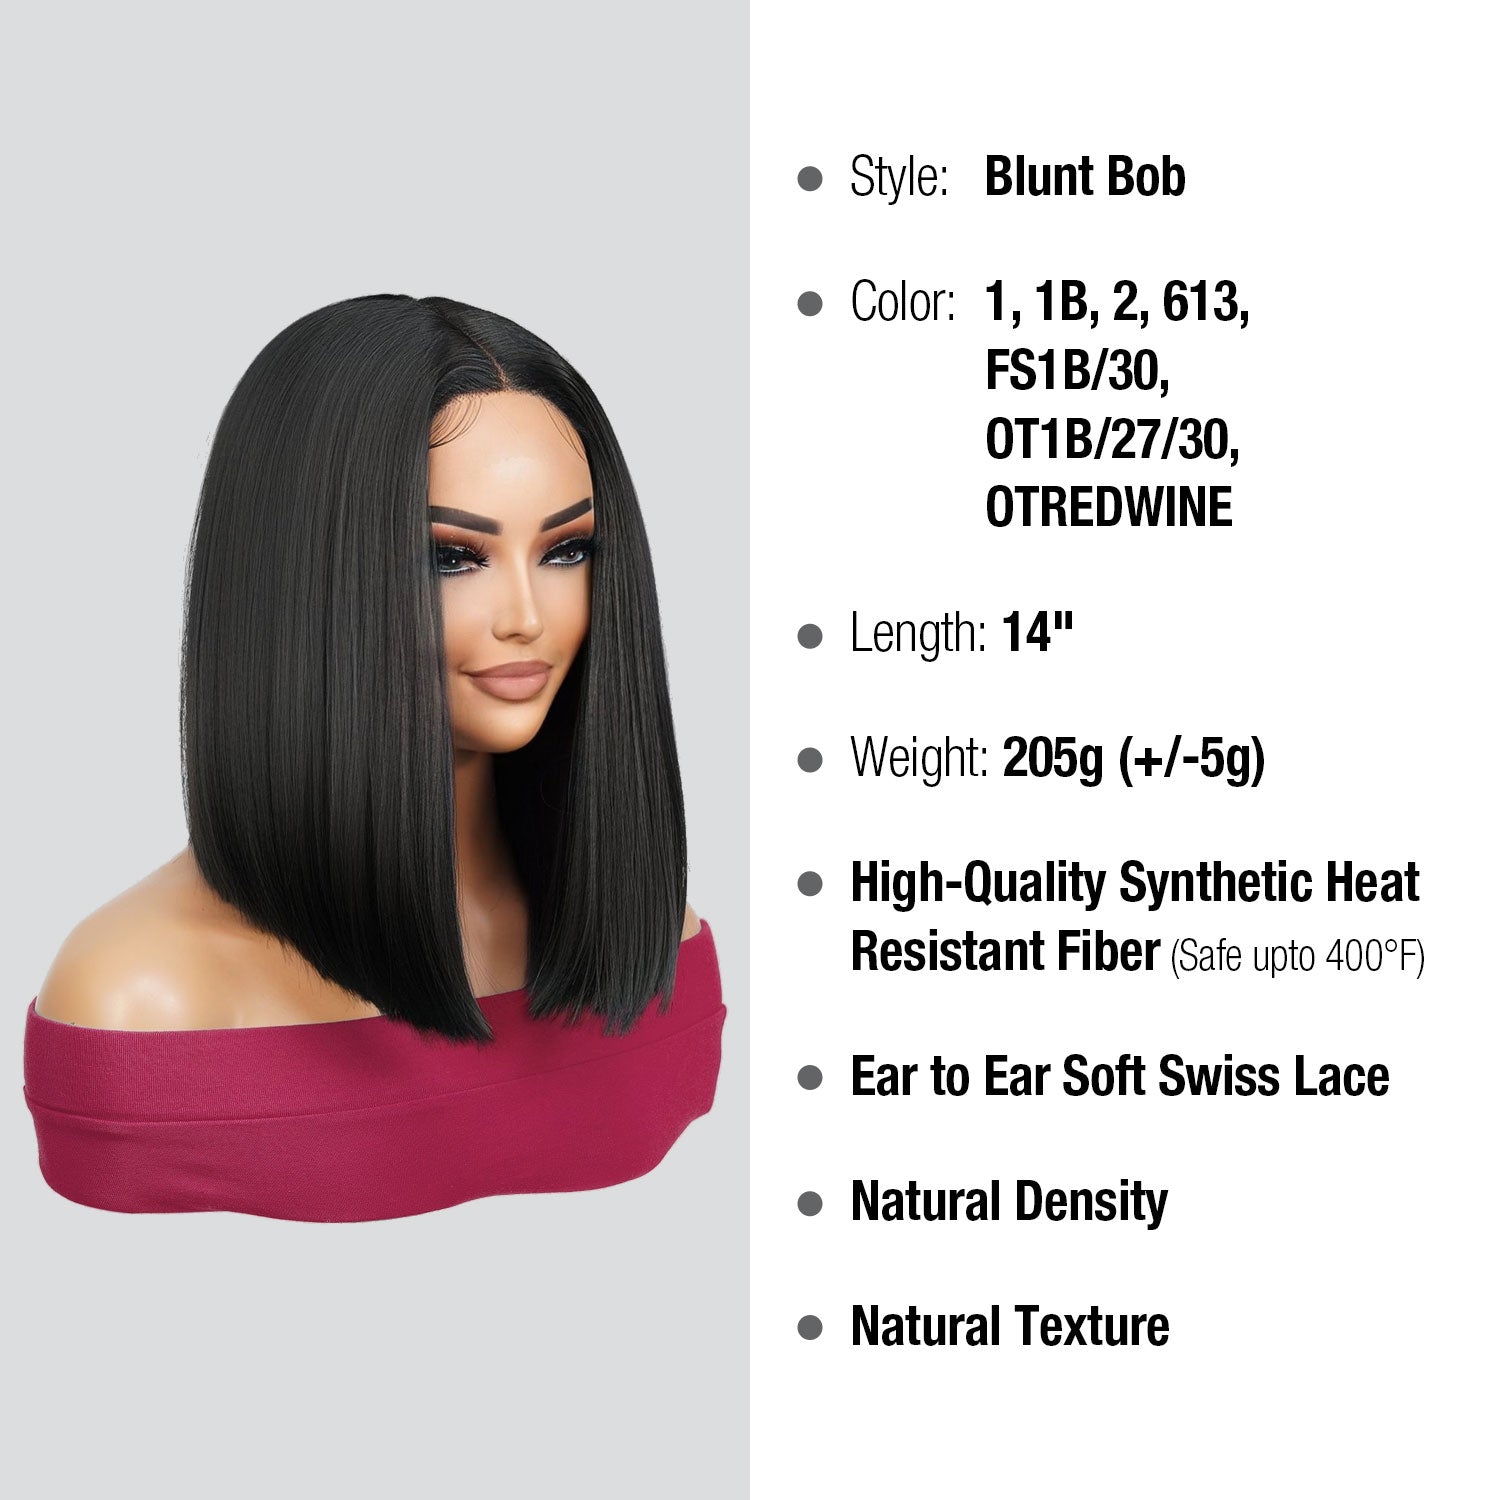  Upgrade your look with our medium blunt bob straight wig. Made with high-quality heat-resistant fibers, it features a natural-looking hairline and Swiss lace front design. Perfect for black women, it's versatile and stylish. Shop now for ultimate style and versatility!